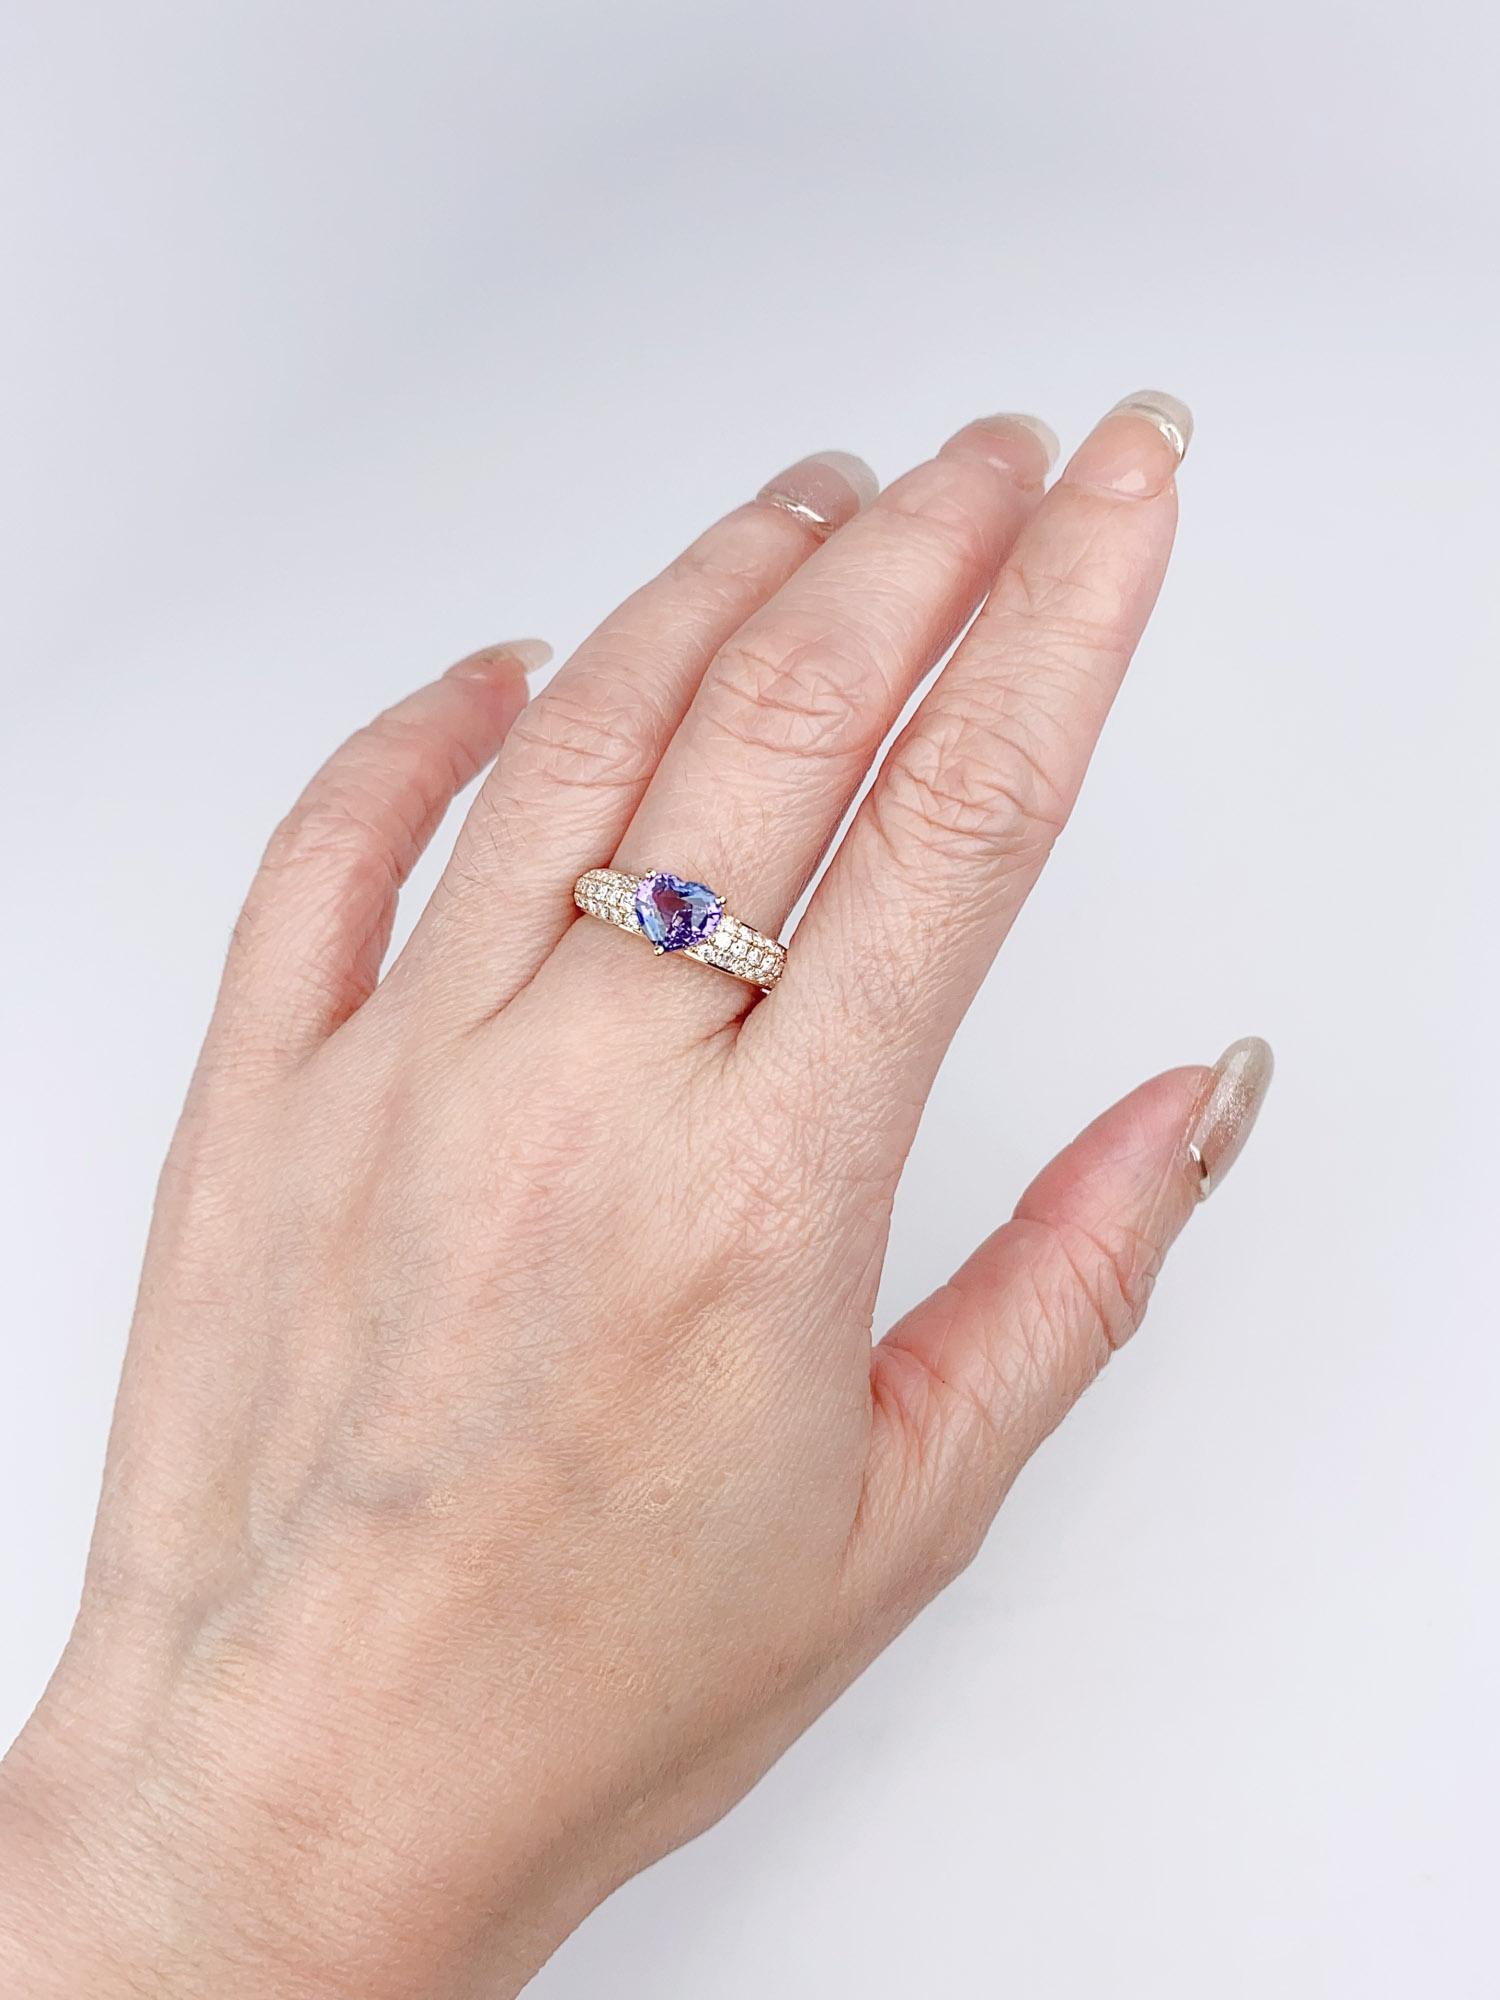 1.5ct Pinkish Purple Sapphire on Diamond Pave Engagement Ring 14K Gold R6499 For Sale 3